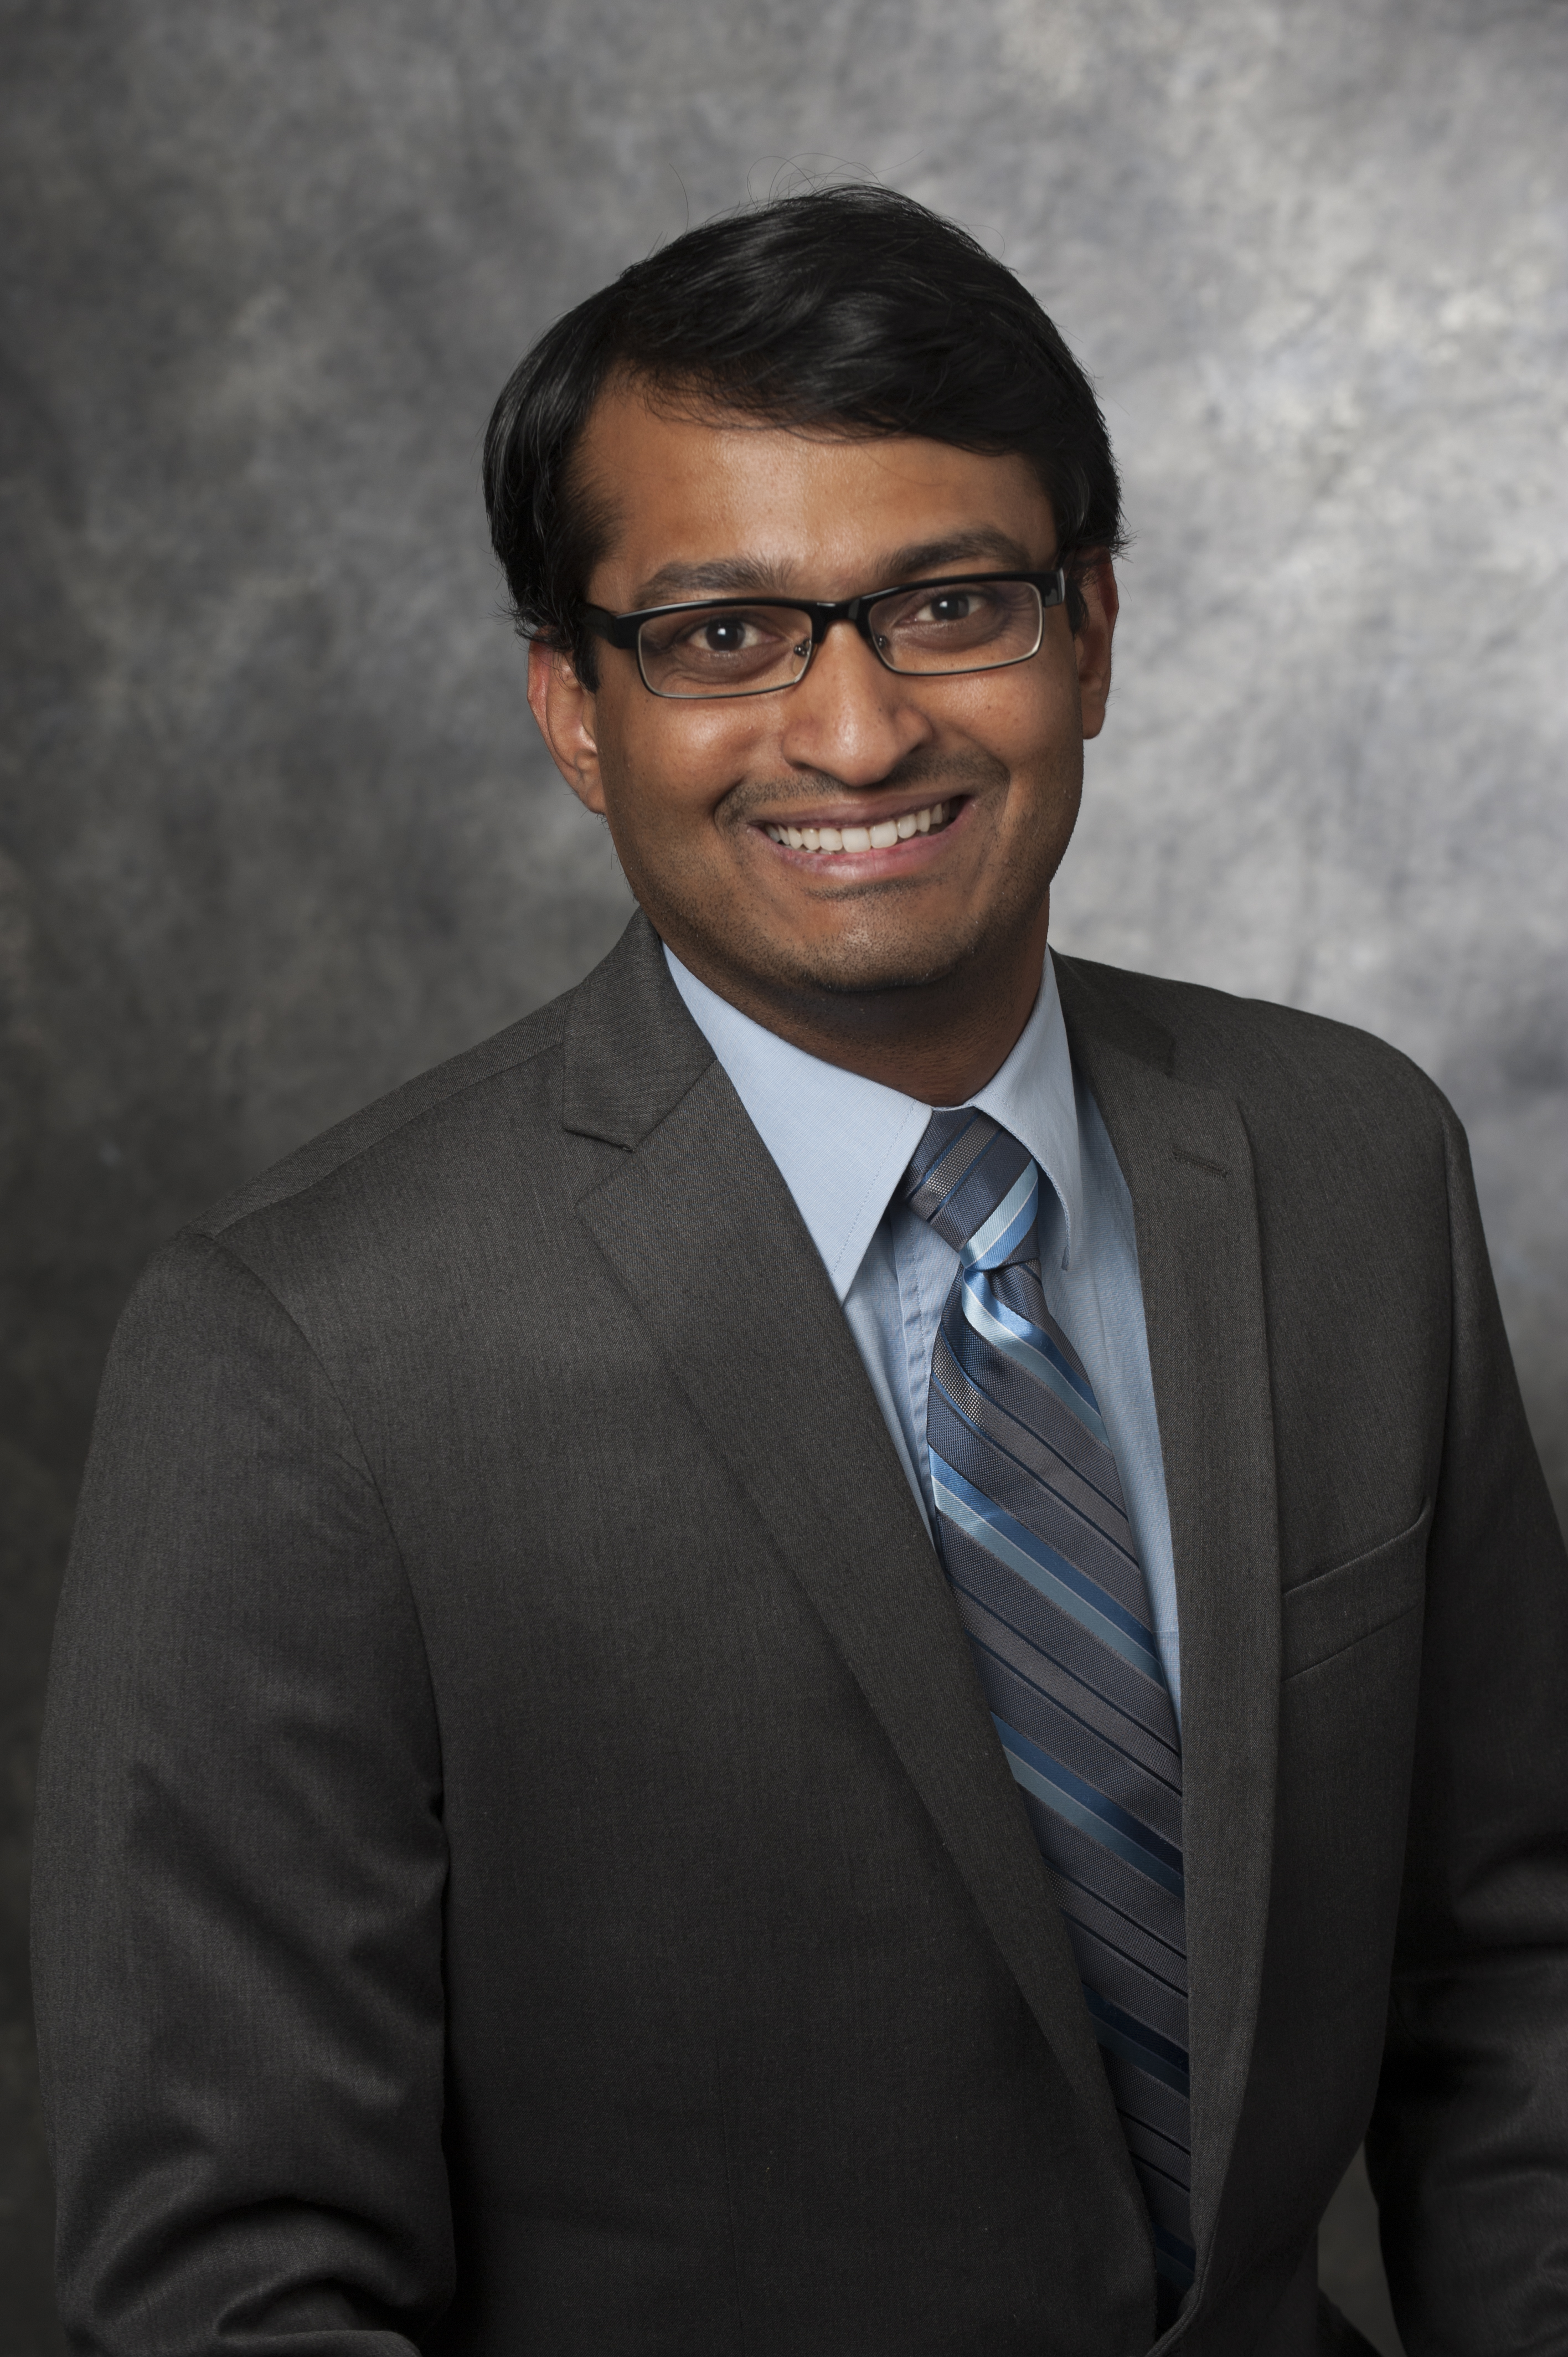 A headshot of Harsha Gangammanavar, a member of the Lyle School of Engineering Faculty.